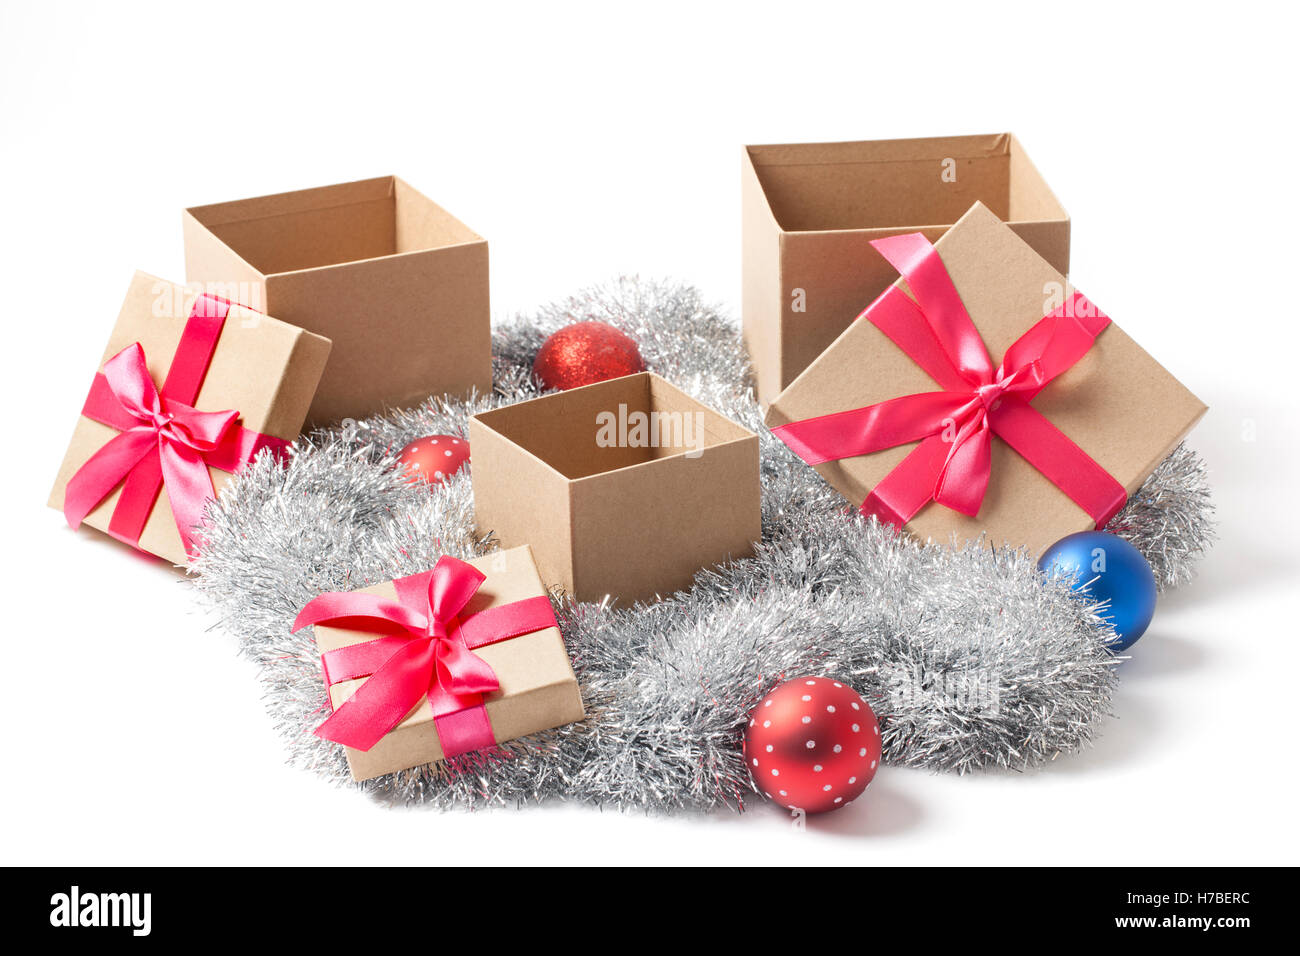 Several Open Christmas gift boxes with red ribbons tree balls and tinsel garland isolated on white. Stock Photo